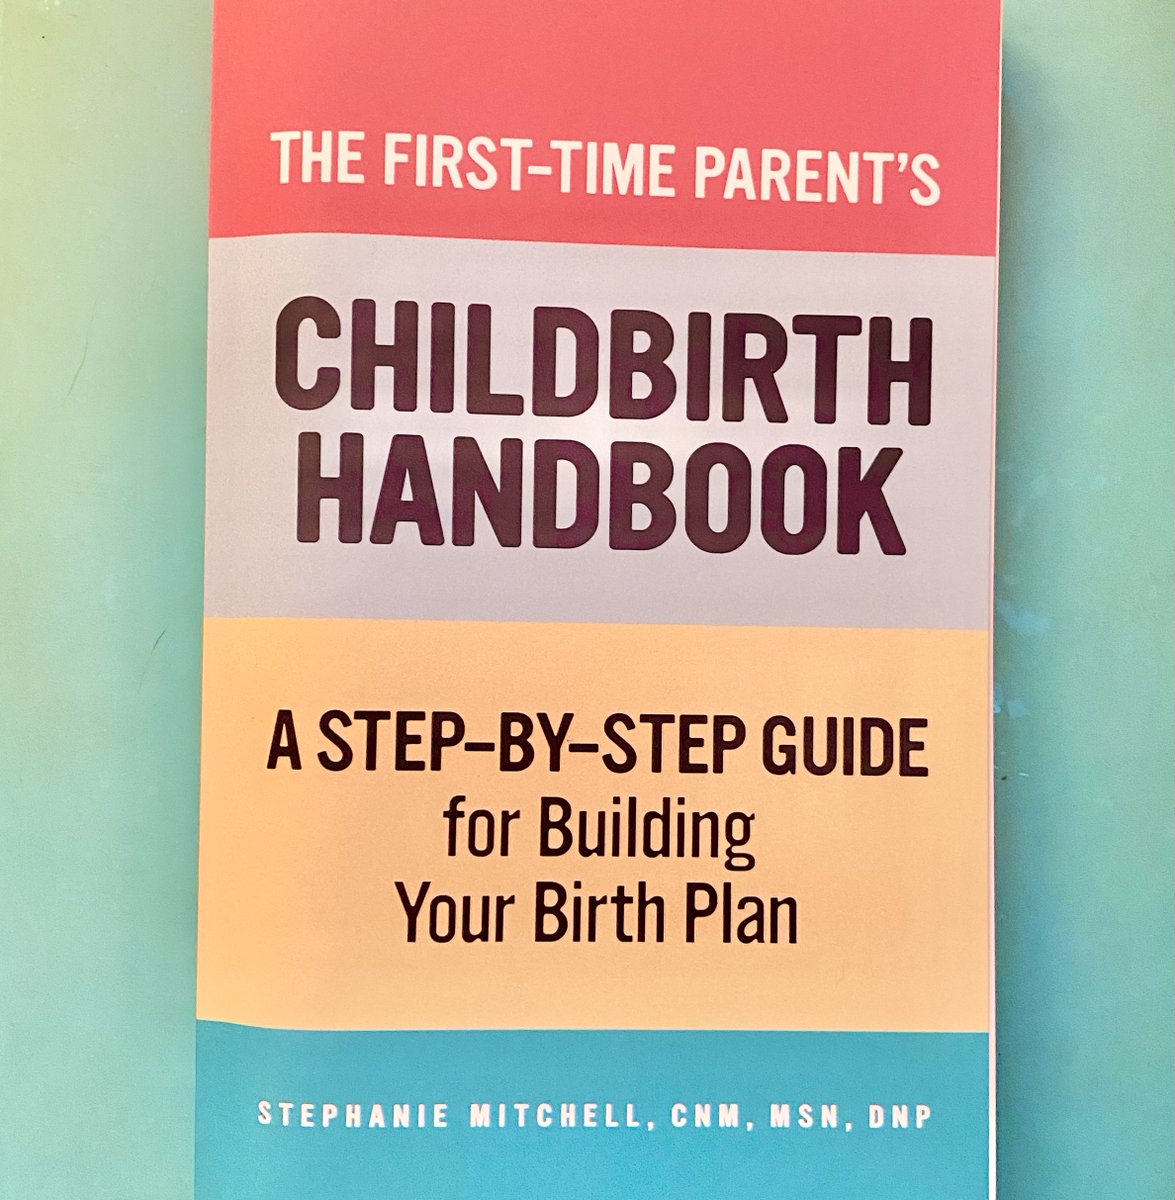 “This quick read is the perfect road map to guide your birth-planning journey. Dr. Mitchell provides an objective overview of options to set yourself up for an empowering birth experience. Pick up this gem early in your pregnancy”